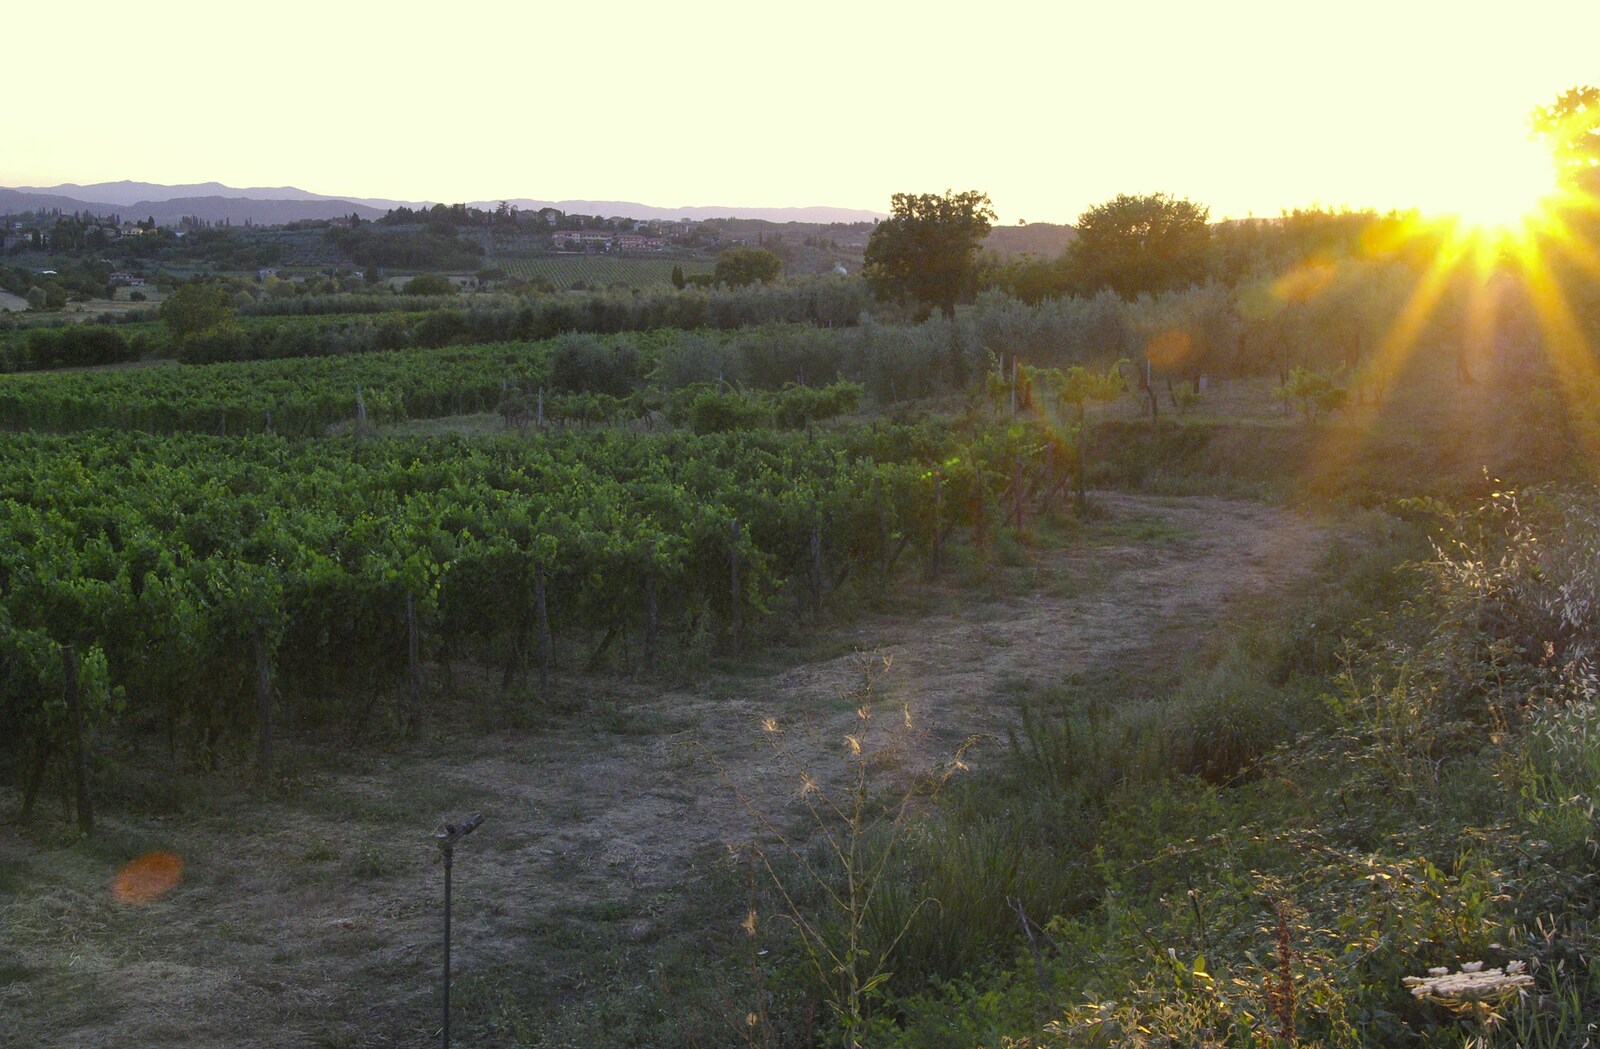 Sunset over the vineyards from Tenuta Il Palazzo in Arezzo, Tuscany, Italy - 22nd July 2008